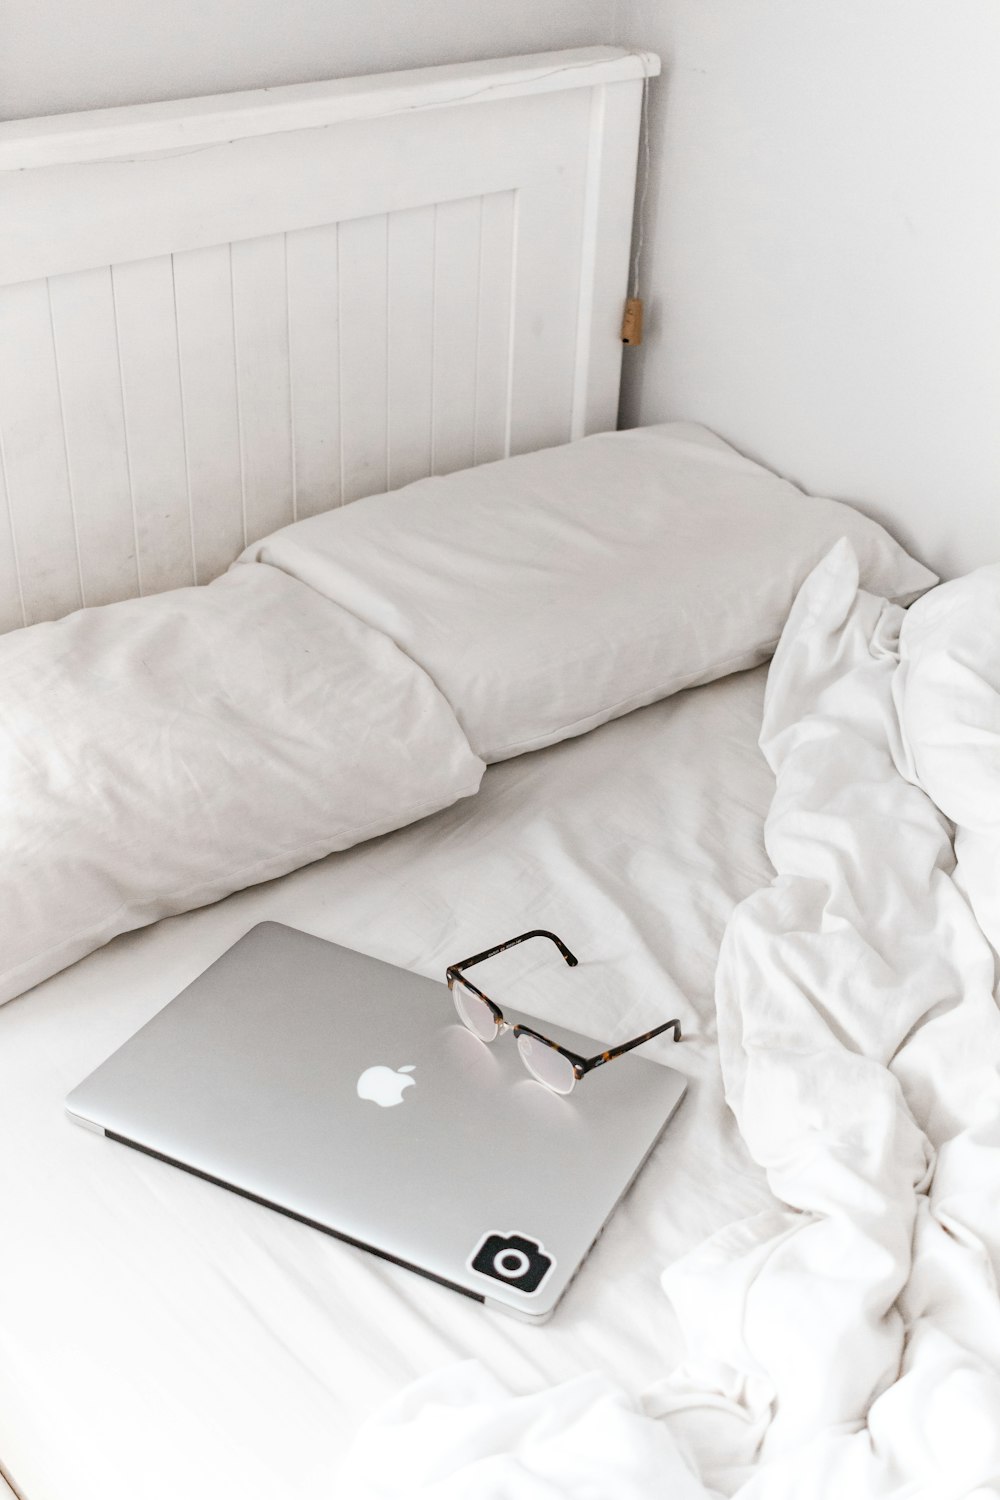 silver macbook on white bed